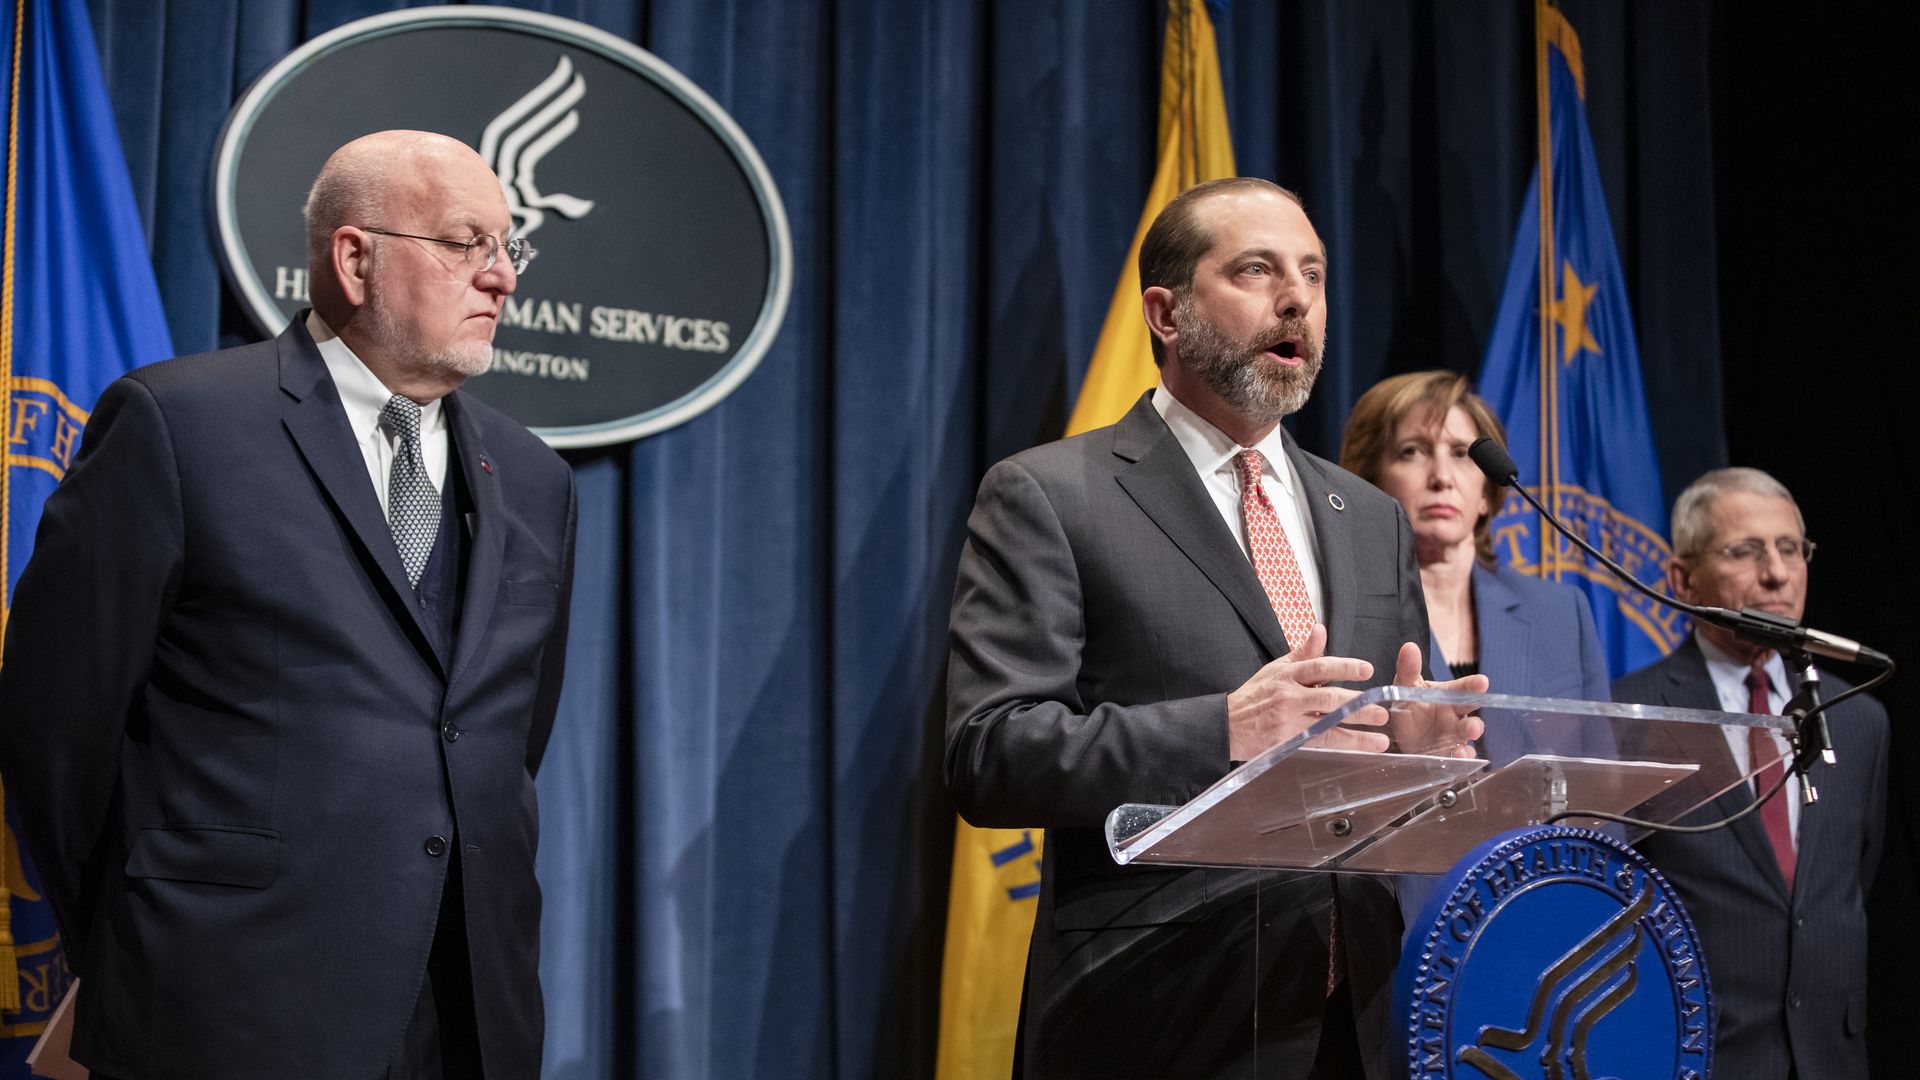 HHS Secretary Alex Azar and 3 other public health officials at the news briefing